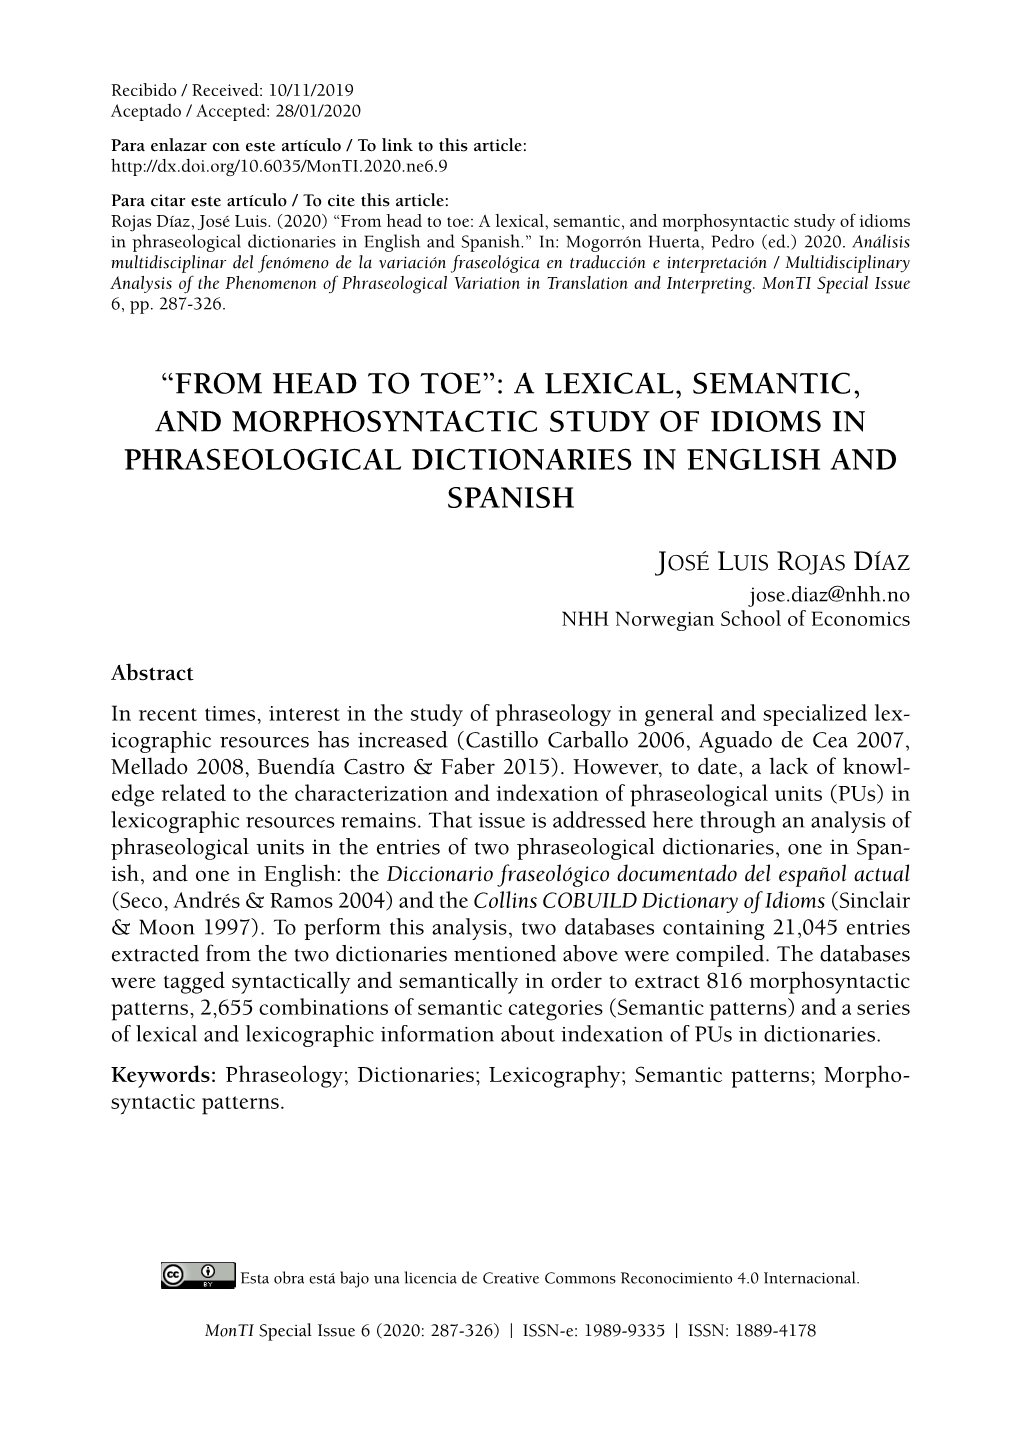 “From Head to Toe”: a Lexical, Semantic, and Morphosyntactic Study of Idioms in Phraseological Dictionaries in English and Spanish